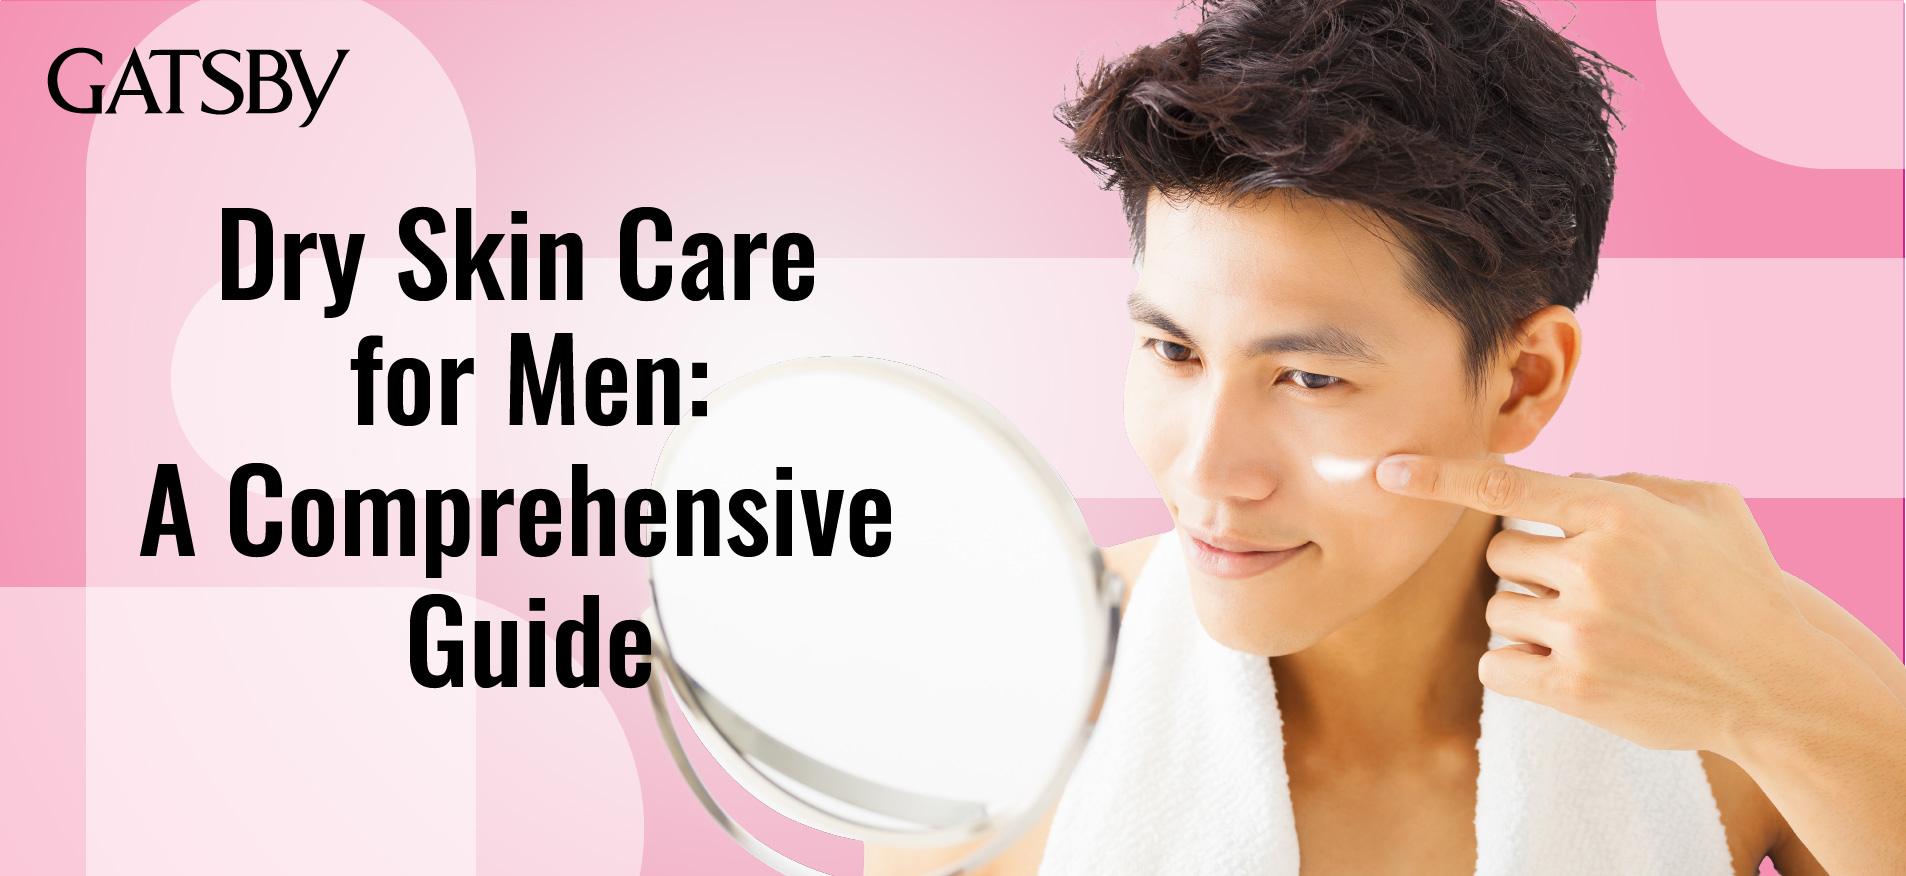 Dry Skin Care For Men: A Comprehensive Guide